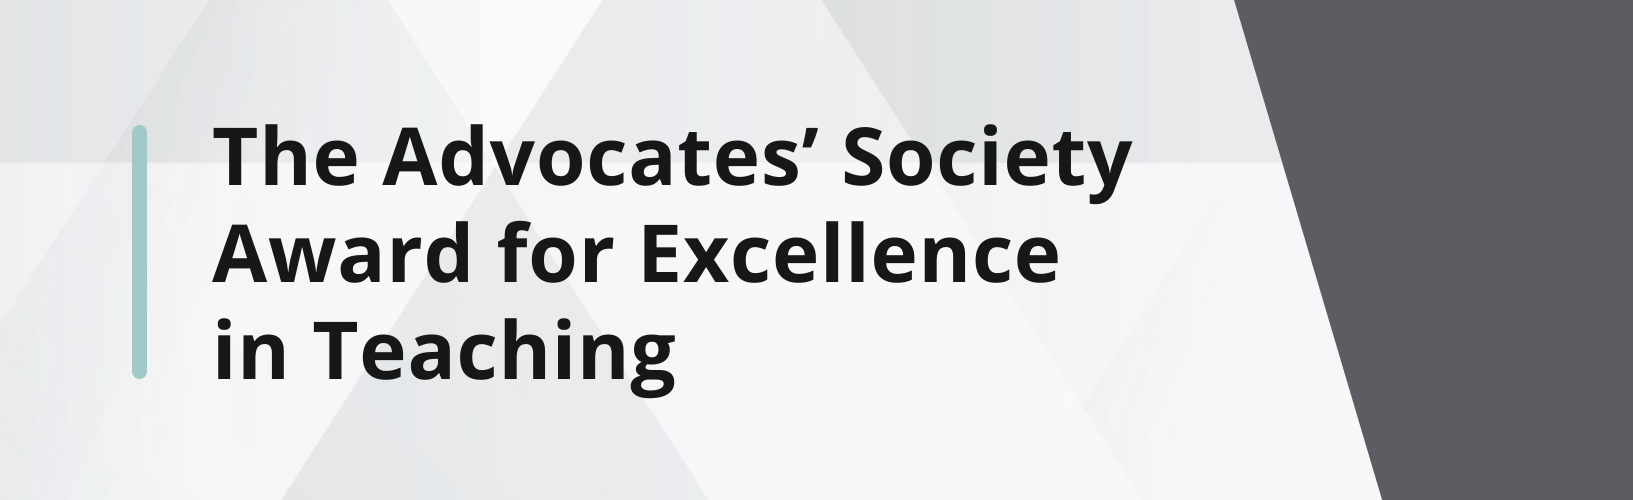 The Advocates' Society Award for Excellence in Teaching